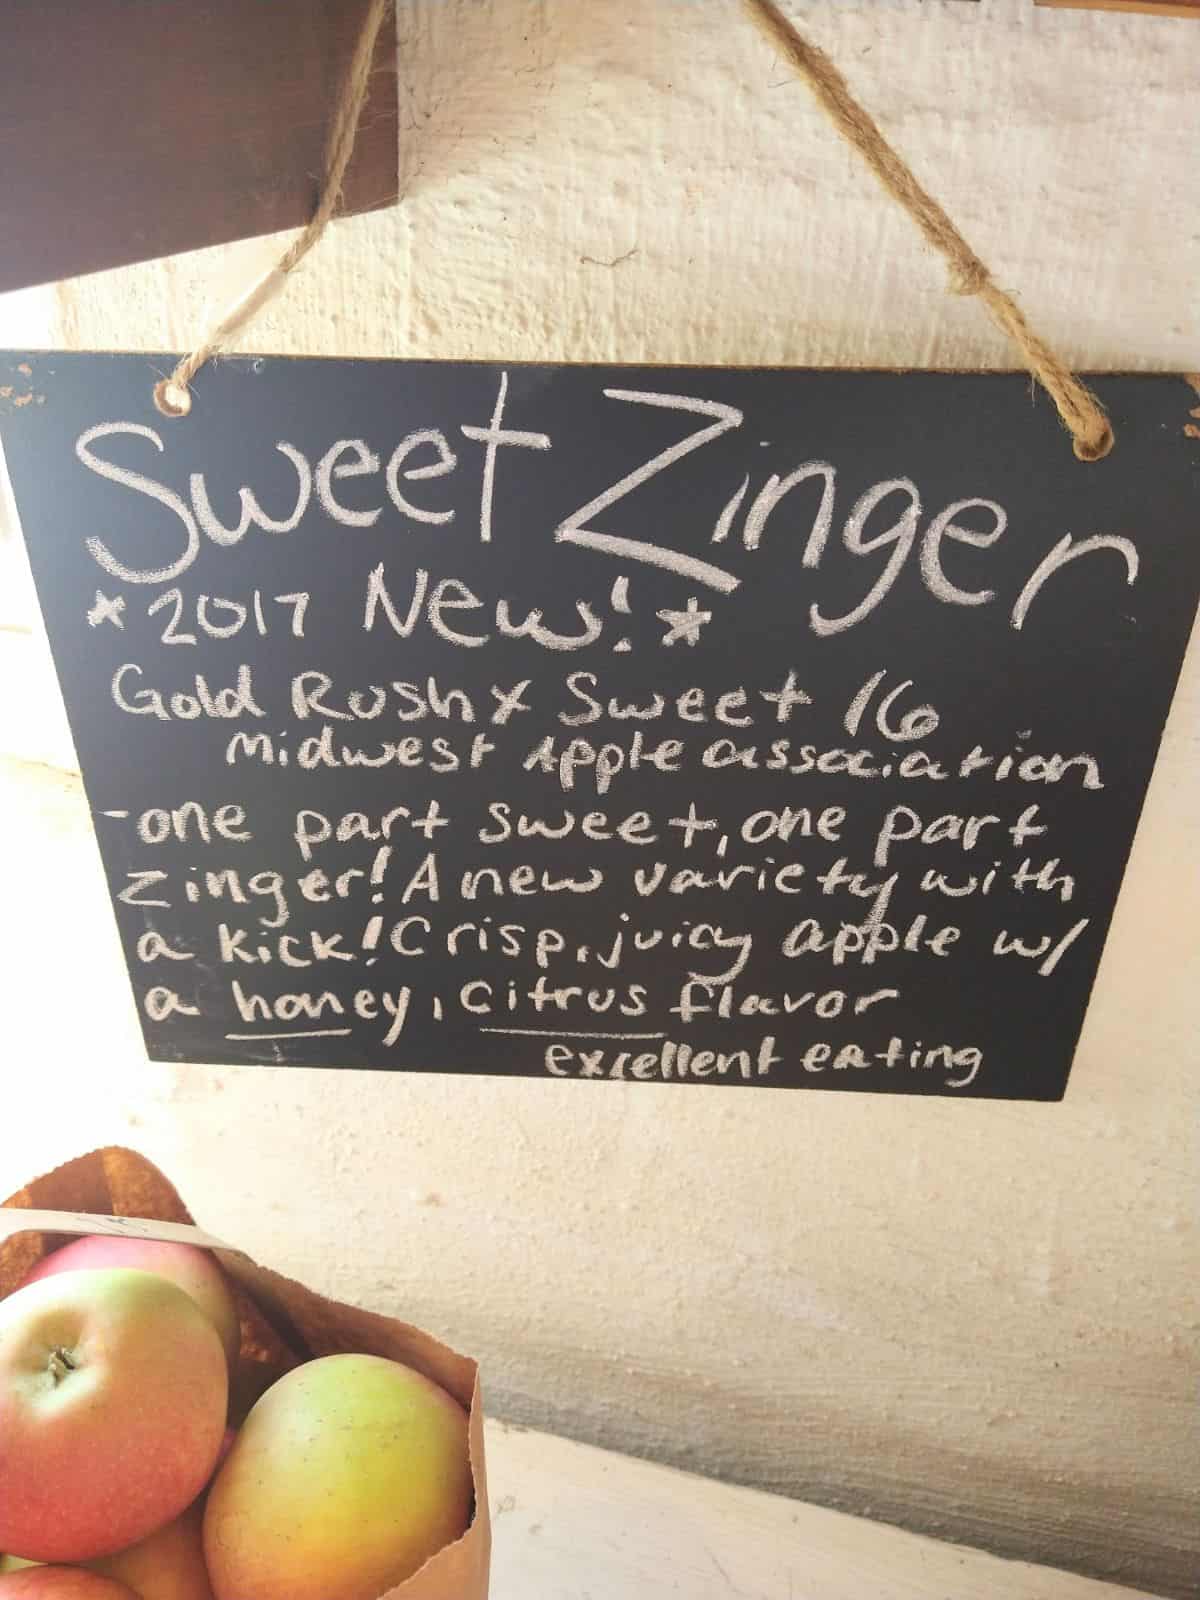 A sign at an apple orchard for Sweet Zinger apples.